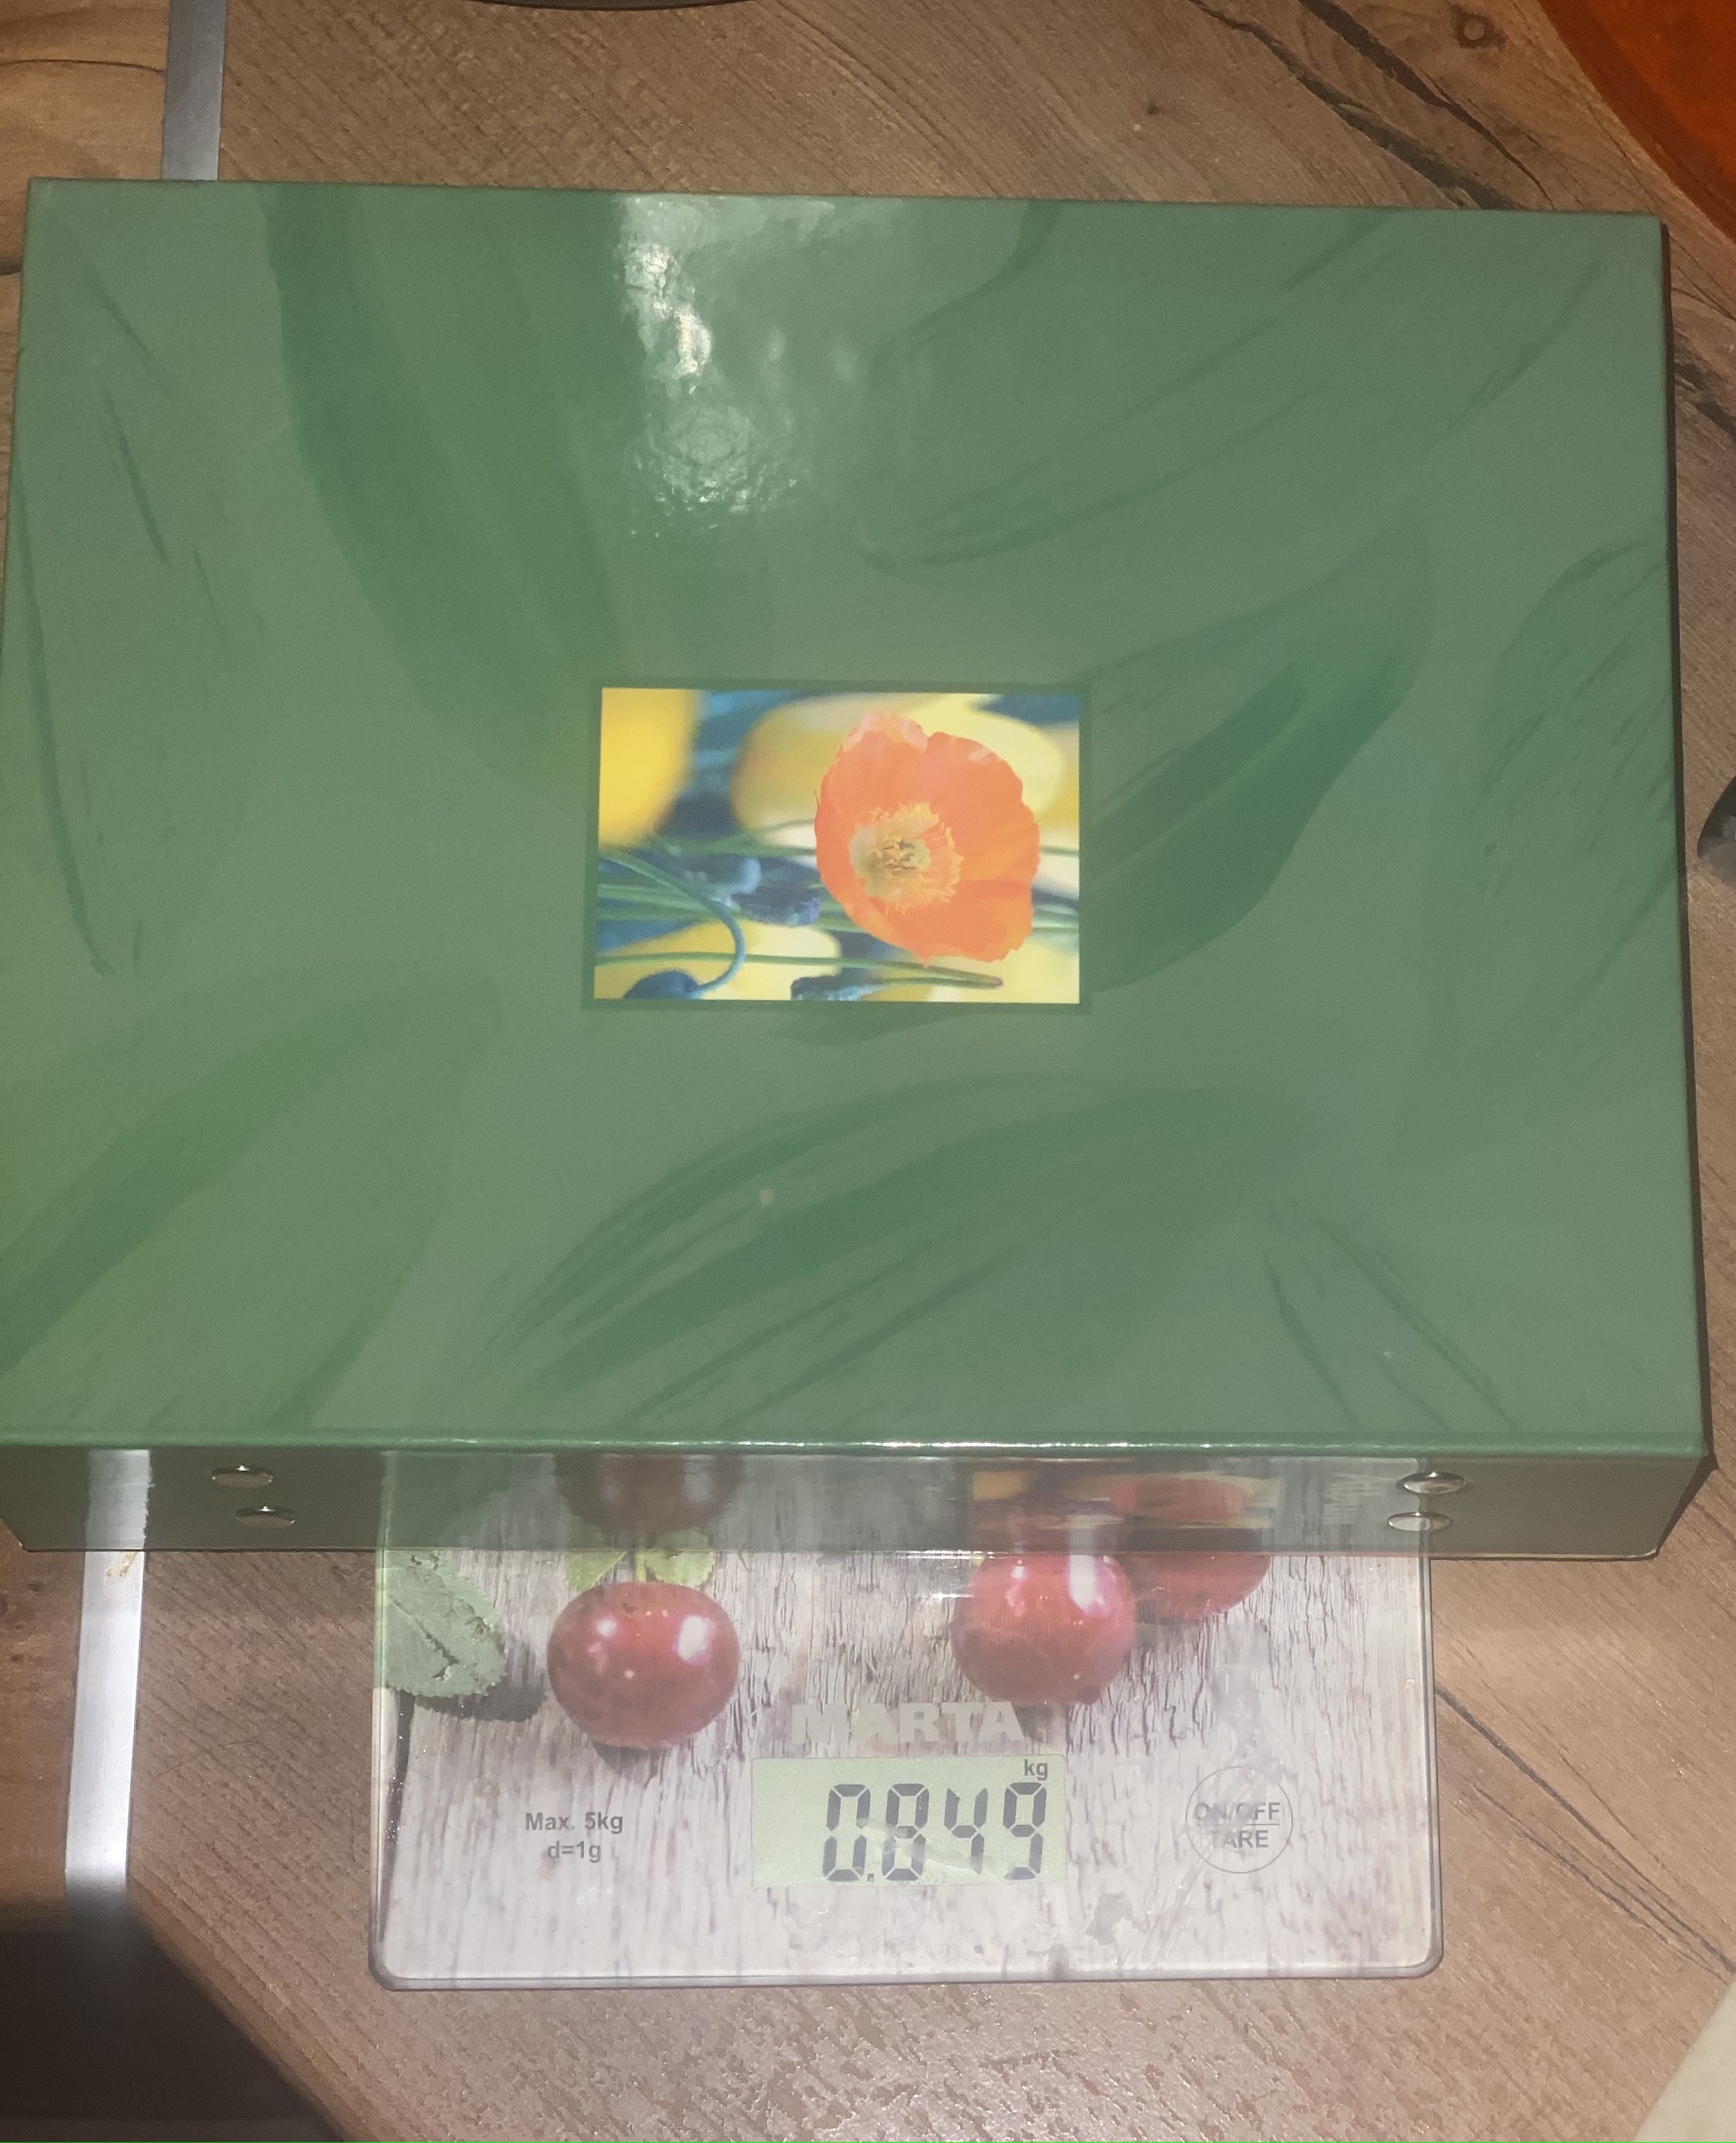 weight of the album for 200 photos in a cardboard cover filled